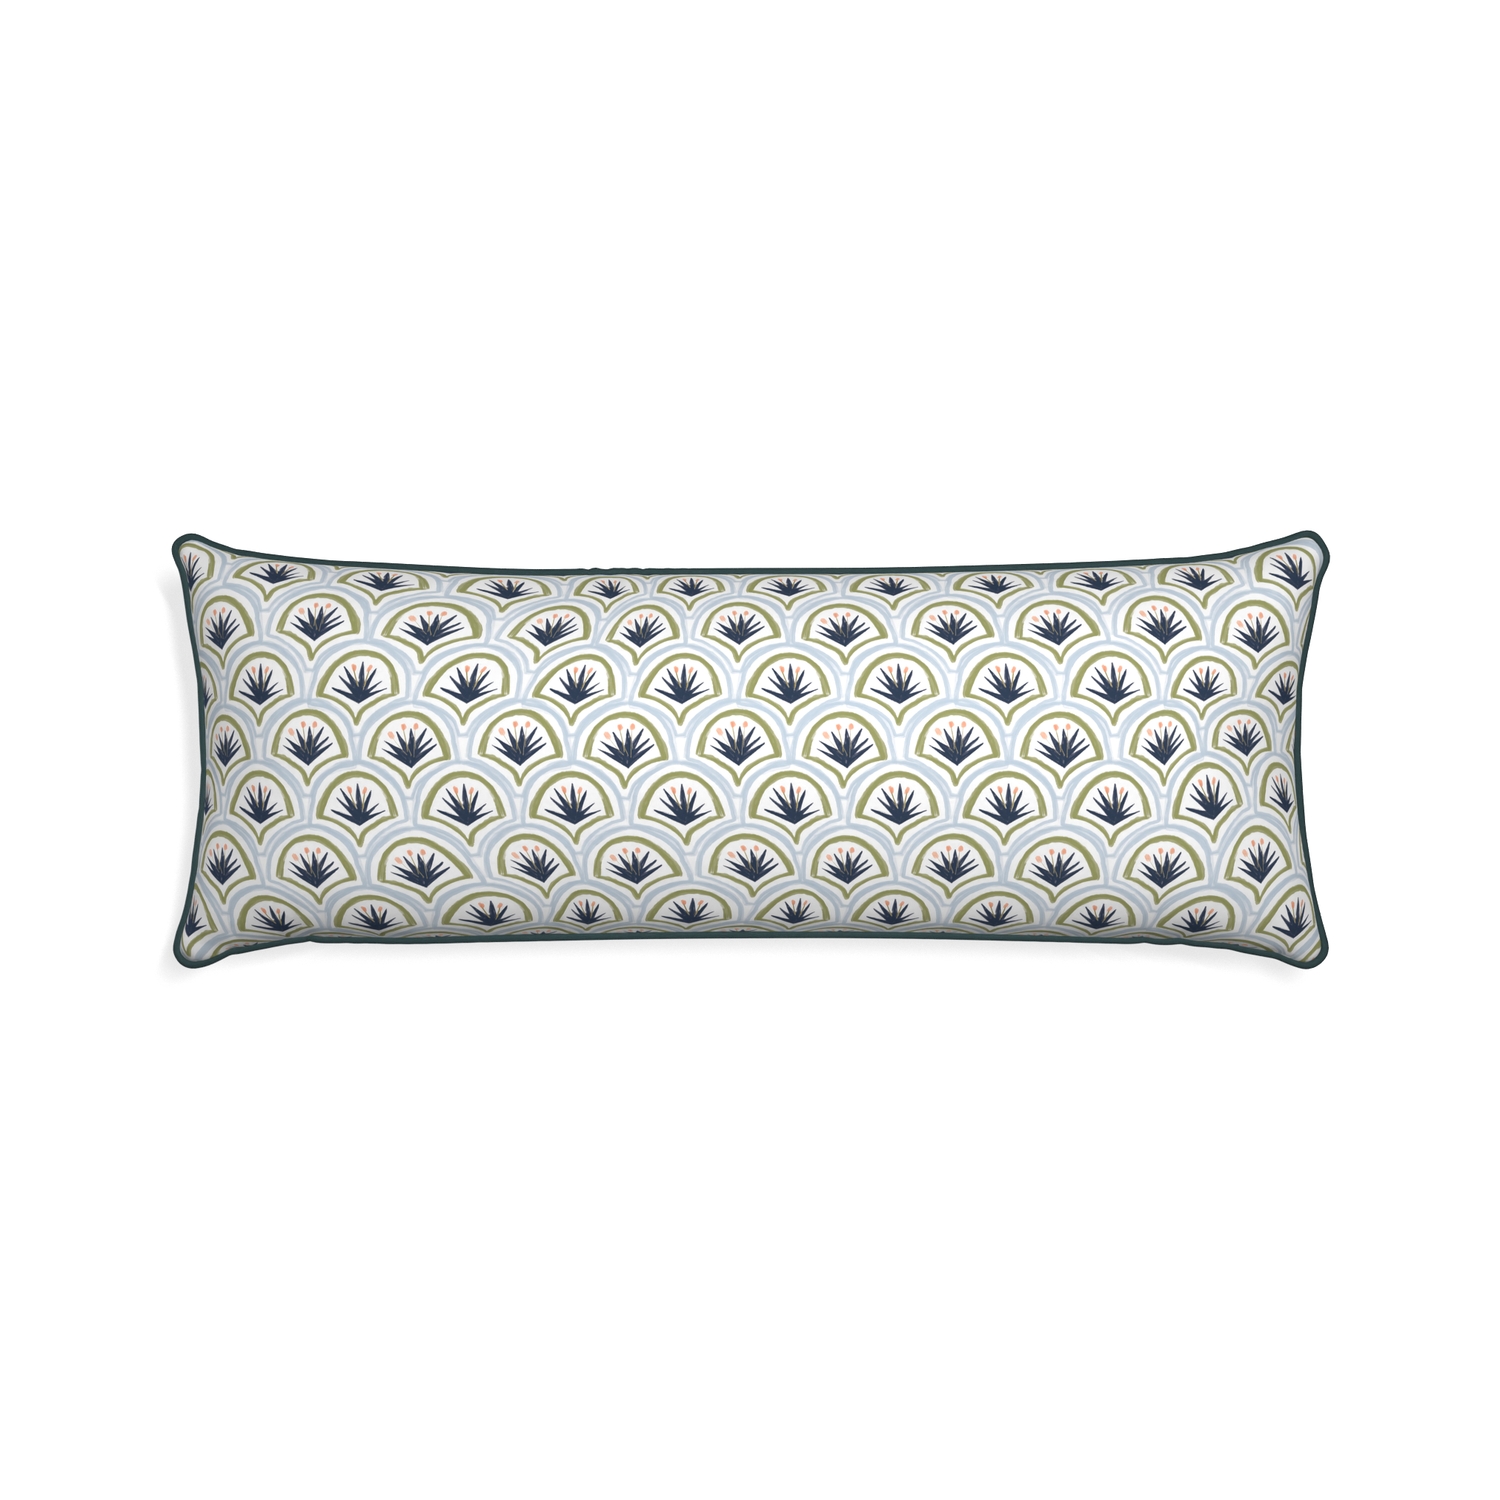 Xl-lumbar thatcher midnight custom art deco palm patternpillow with p piping on white background